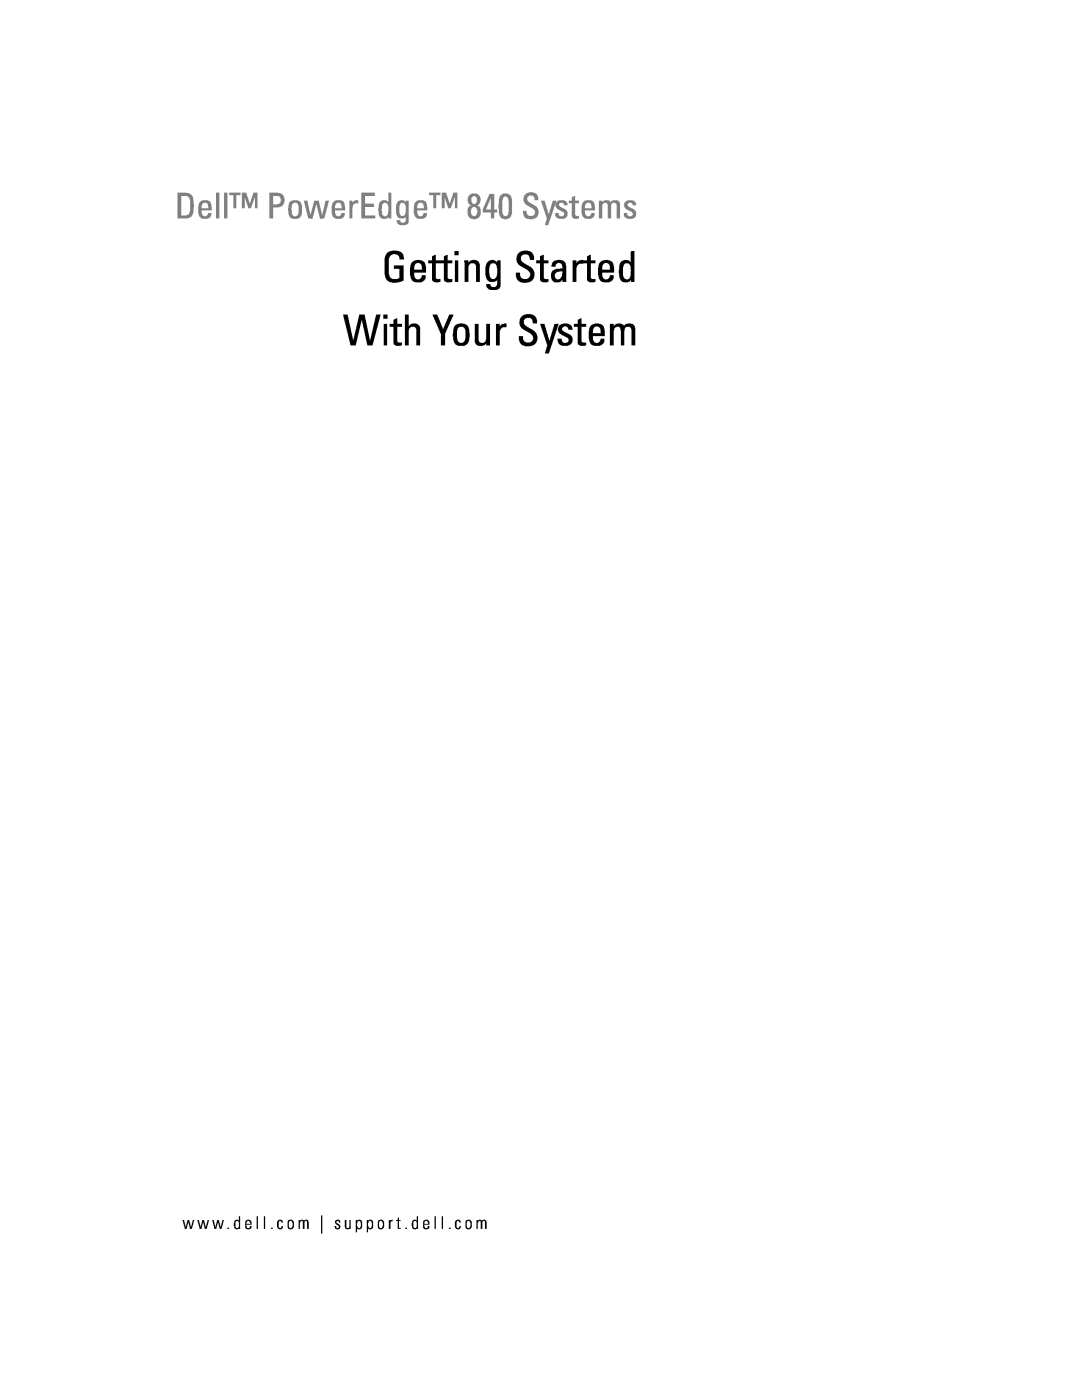 Dell MVT01 manual Getting Started With Your System, Dell PowerEdge 840 Systems 